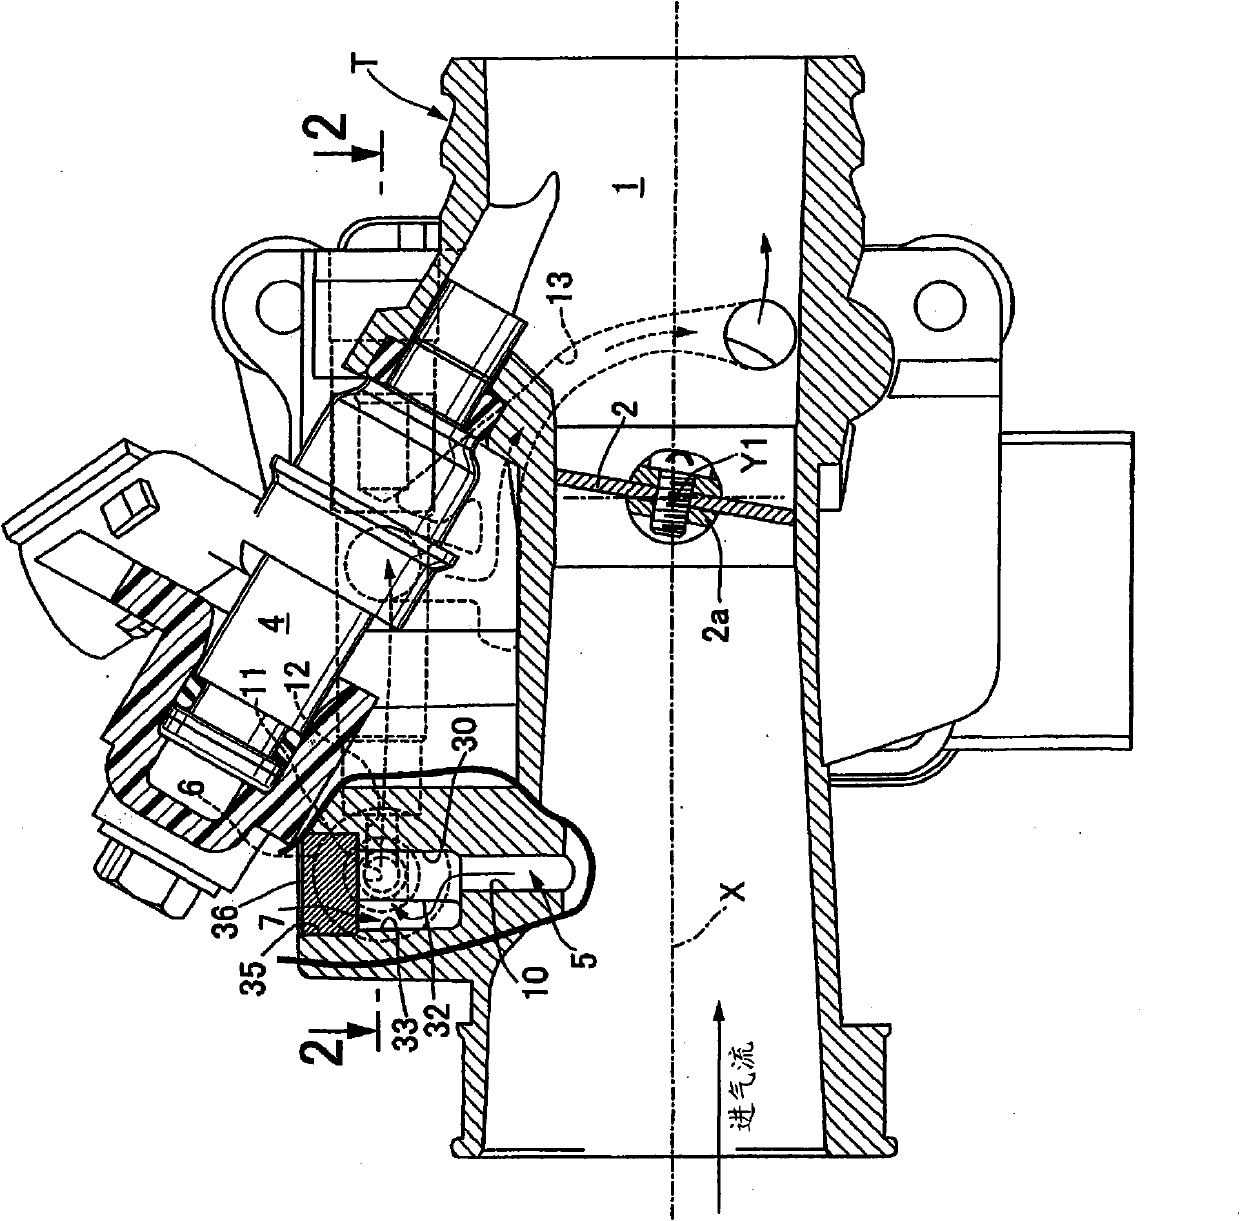 Idle air intake control device of engine